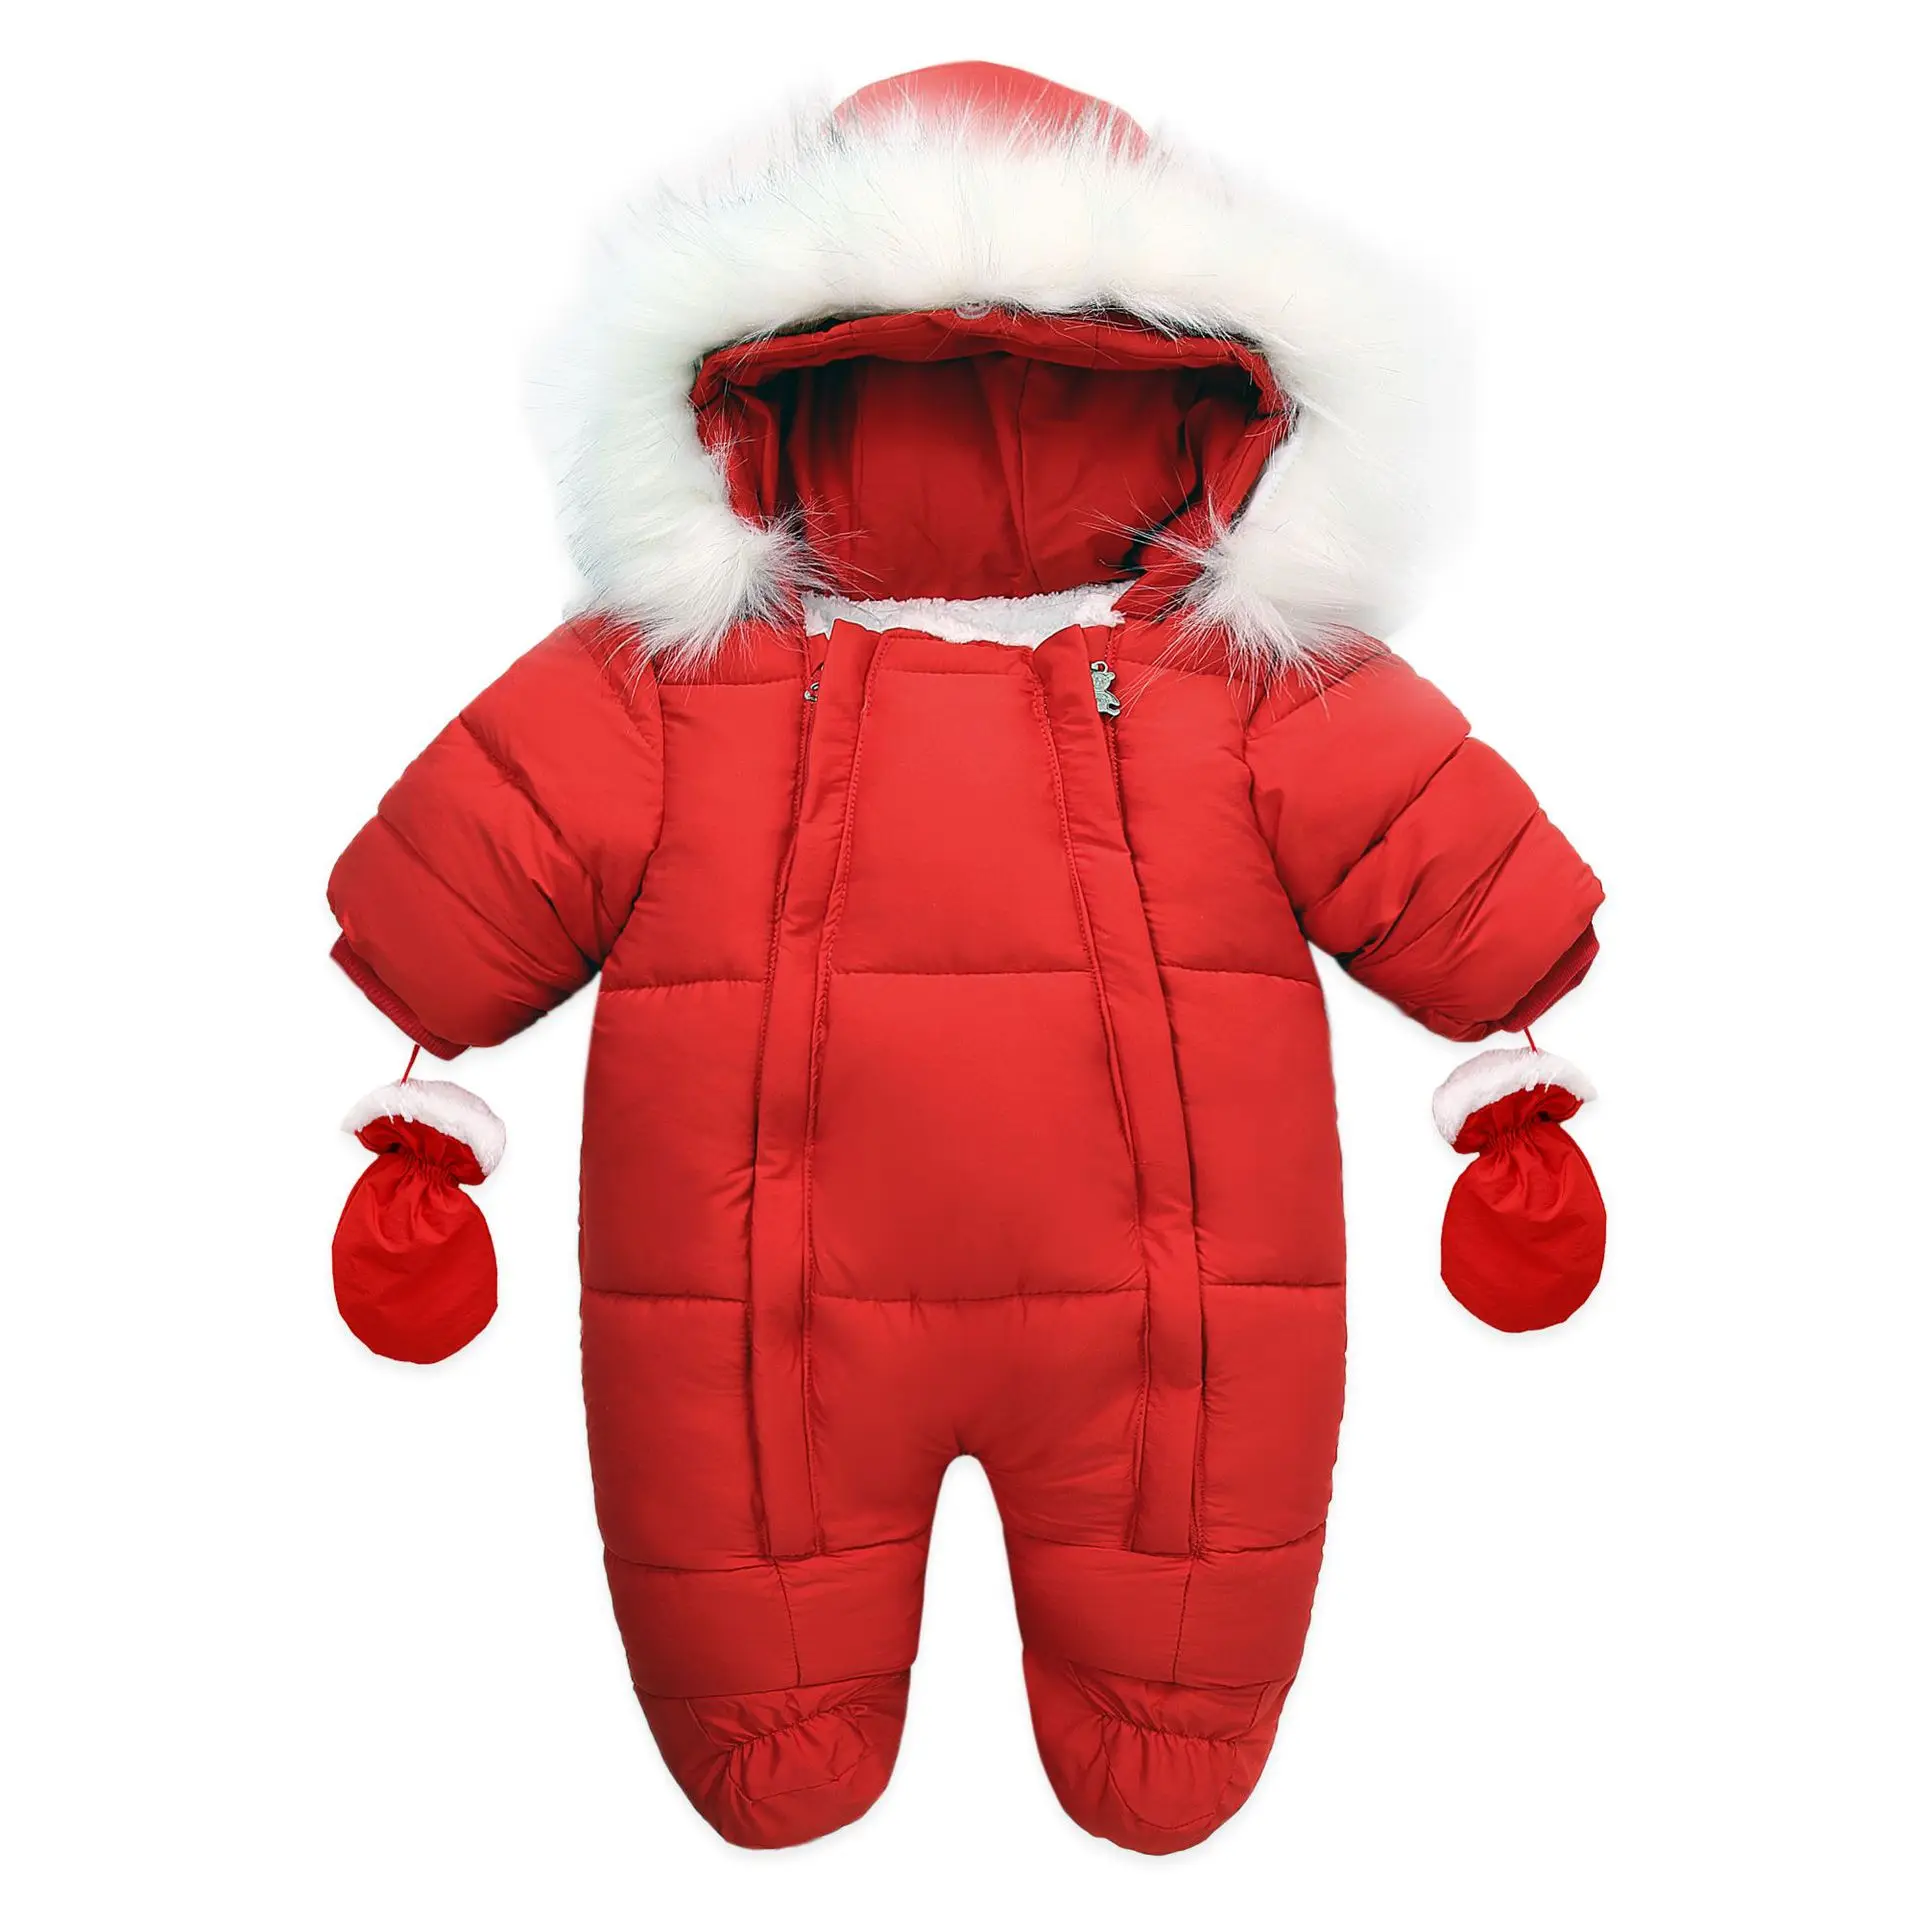 

New Winter Baby Girl Clothes Unisex Cotton Color Polka Dot Hooded Snowsuit Toddler Coats Newborn Baby Romper And Gloves Jacket